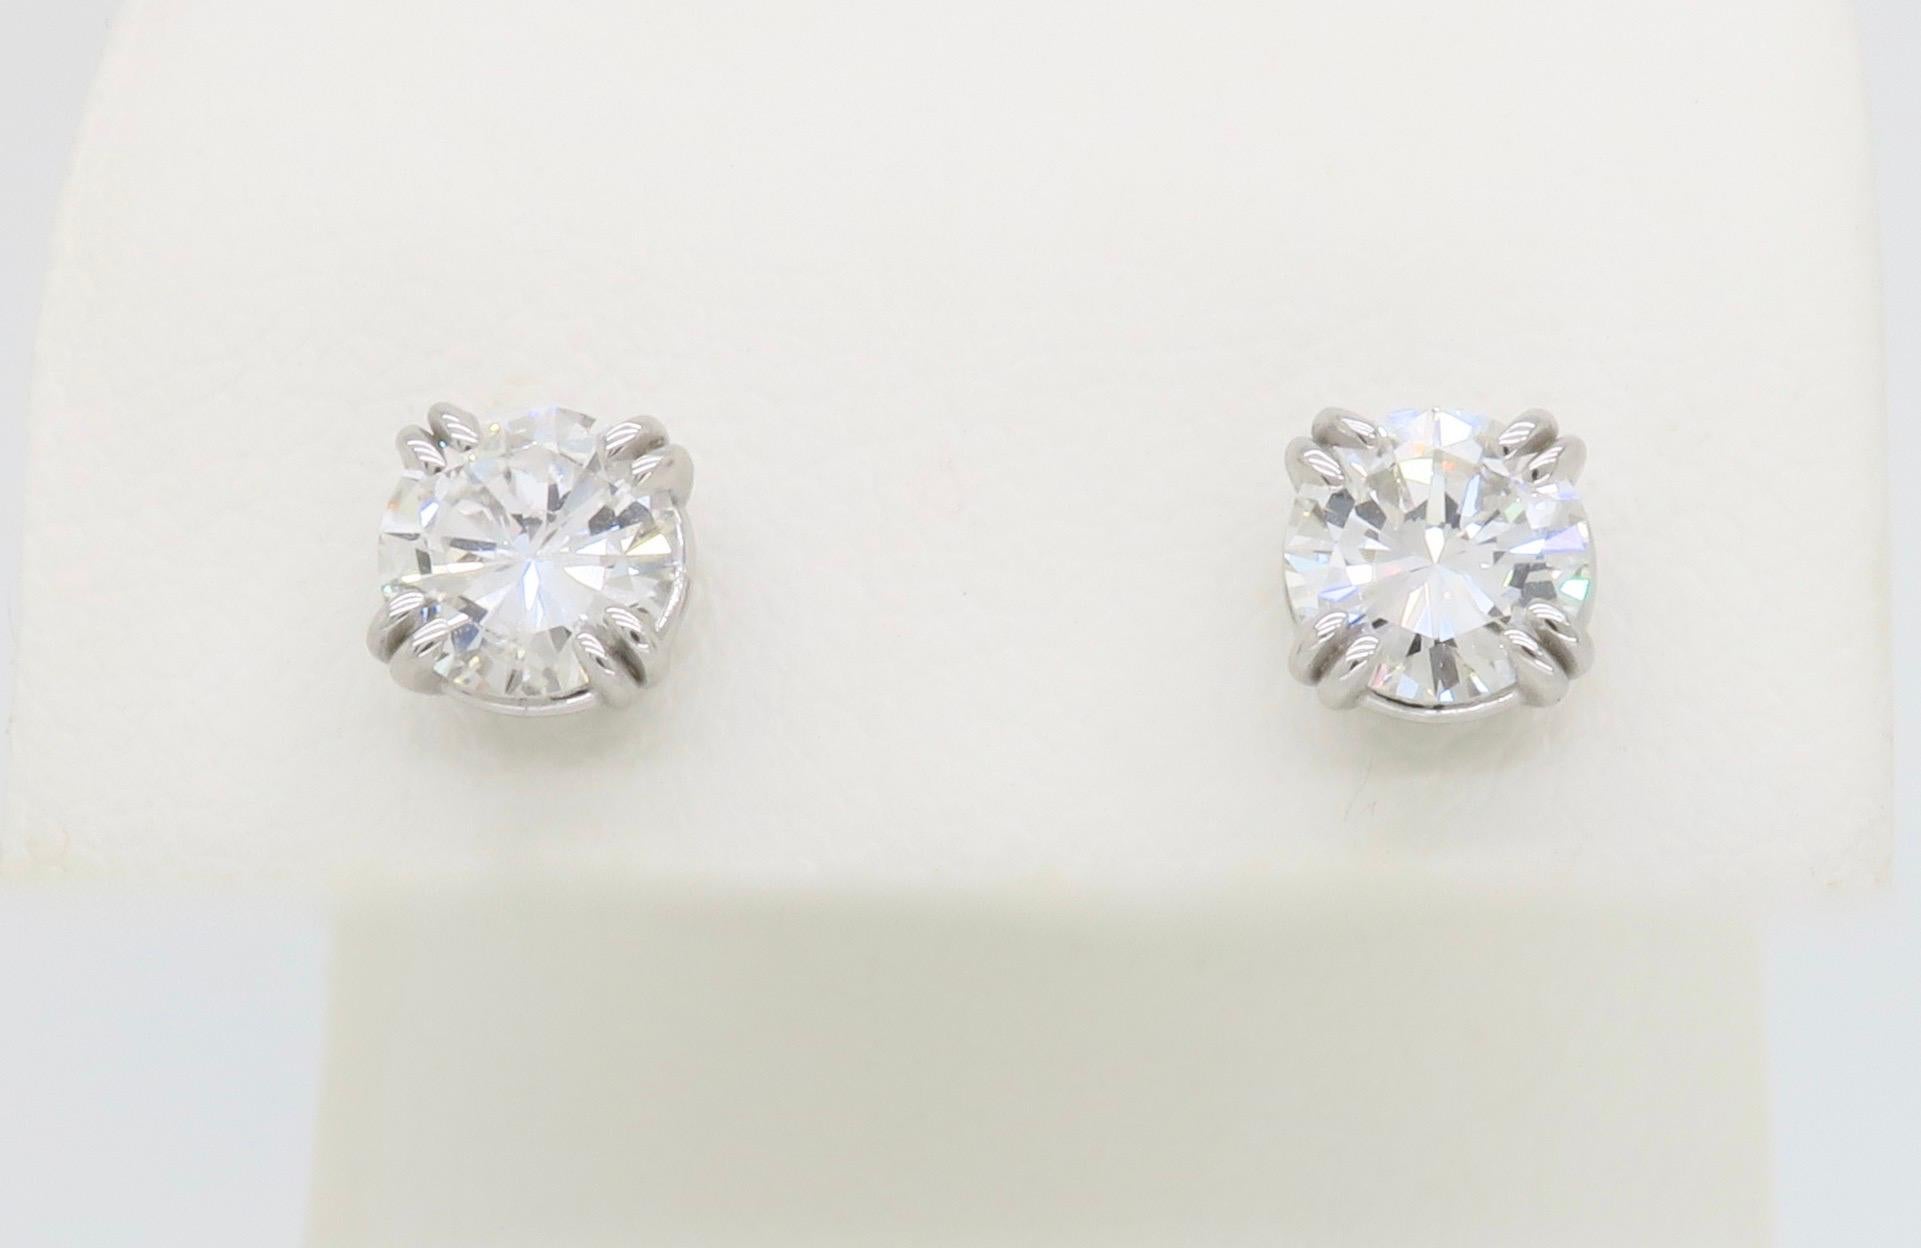 Classic Earth Mined Diamond earrings set into double prong studs. 

Total Diamond Carat Weight: 1.40CTW
Diamond Cut: Round Brilliant Cut 
Diamond Color: G-H
Diamond Clarity: VS2-SI1
Metal: 14k White Gold
Stamped: 